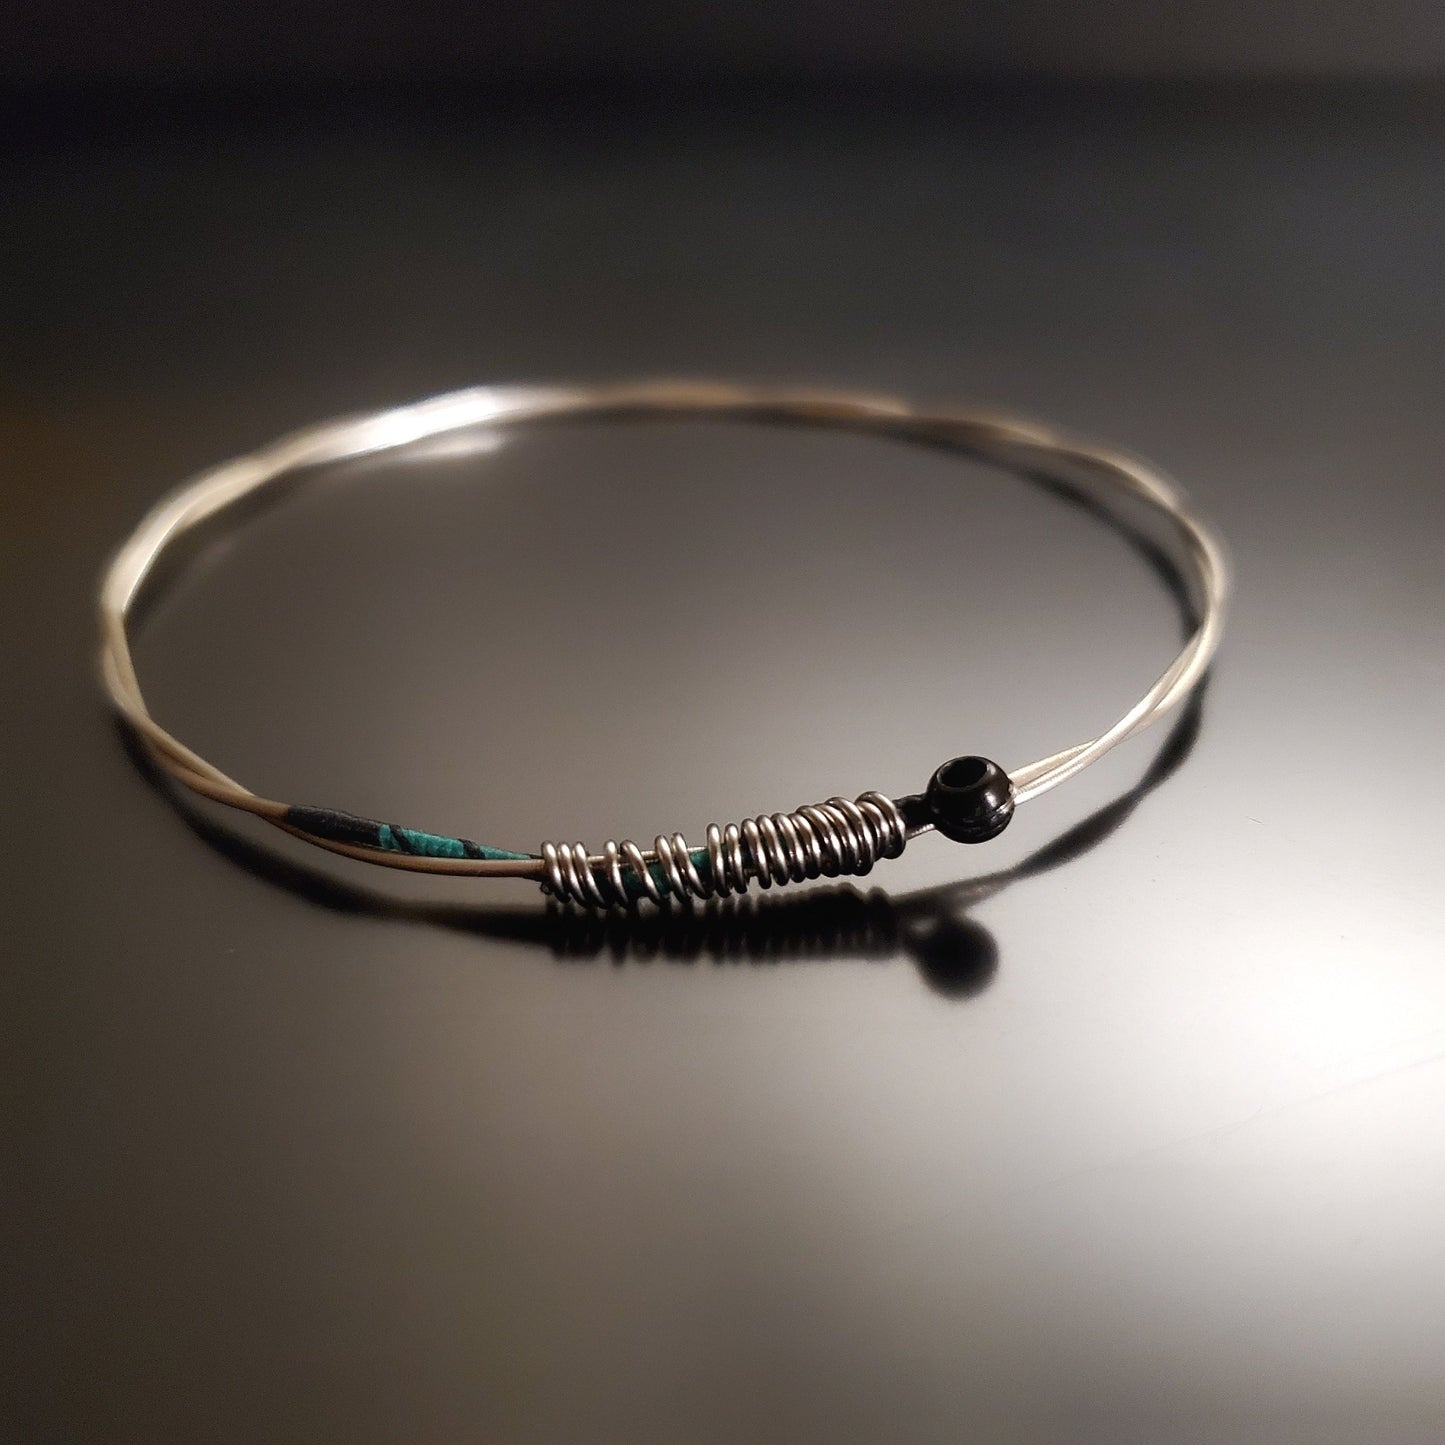 bangle style bracelet made from an upcycled violin